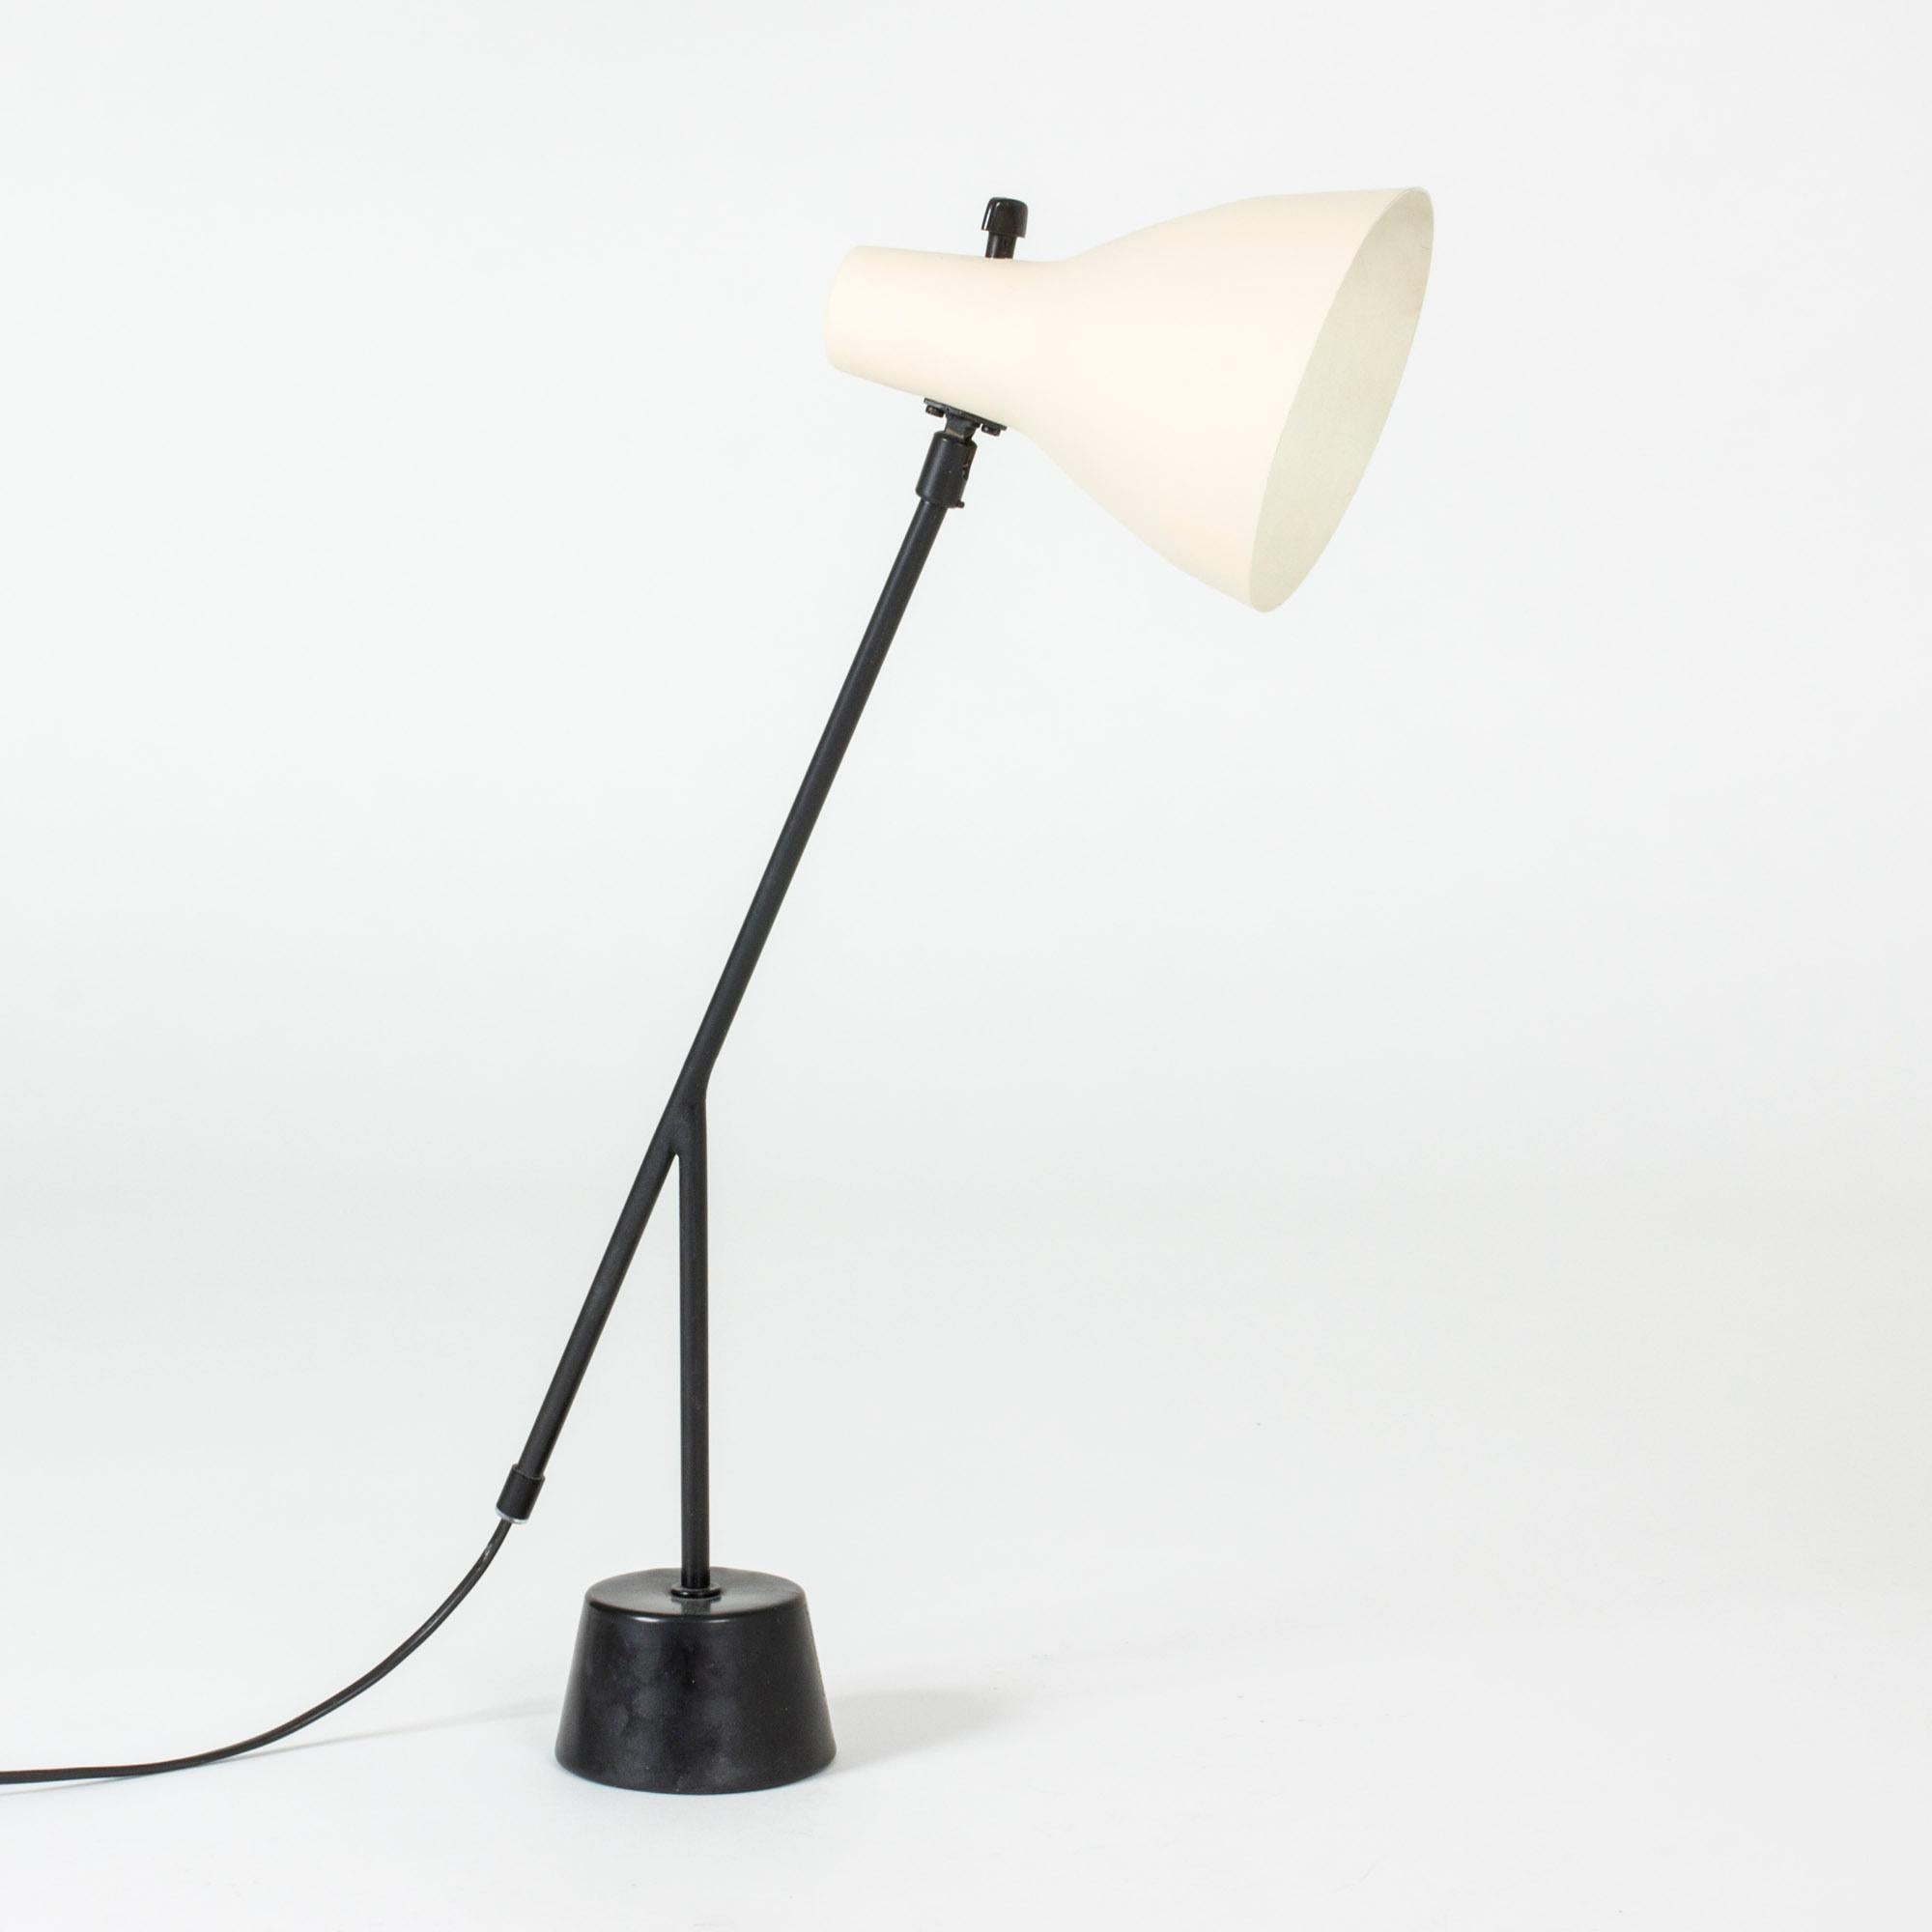 Cool desk lamp from AB Luco Göteborg. Black lacquered base and handle and contrasting off-white lacquered shade.